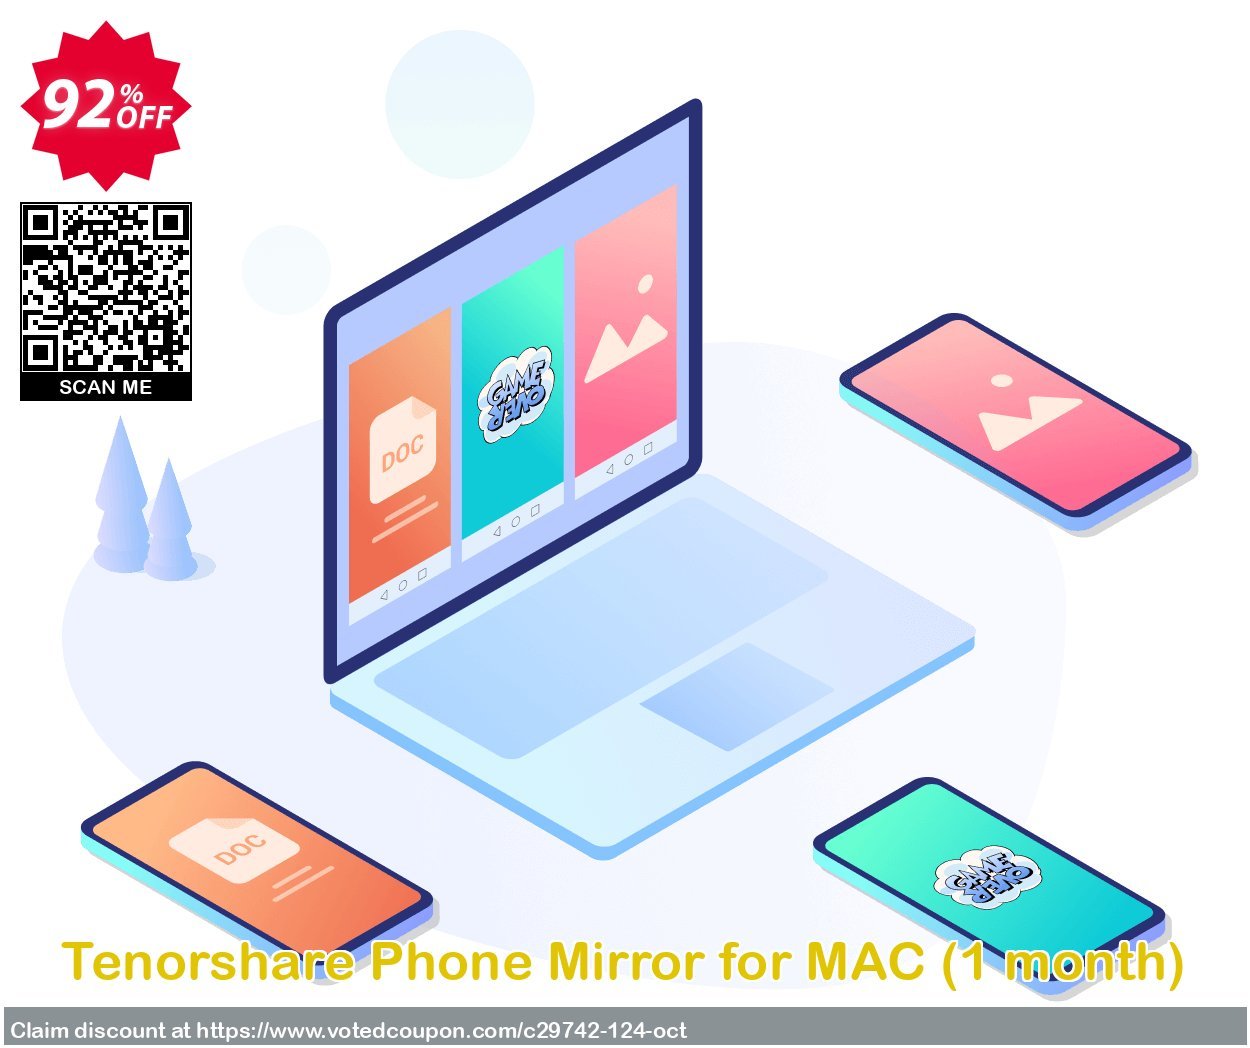 Tenorshare Phone Mirror for MAC, Monthly  Coupon, discount 92% OFF Tenorshare Phone Mirror for MAC (1 month), verified. Promotion: Stunning promo code of Tenorshare Phone Mirror for MAC (1 month), tested & approved